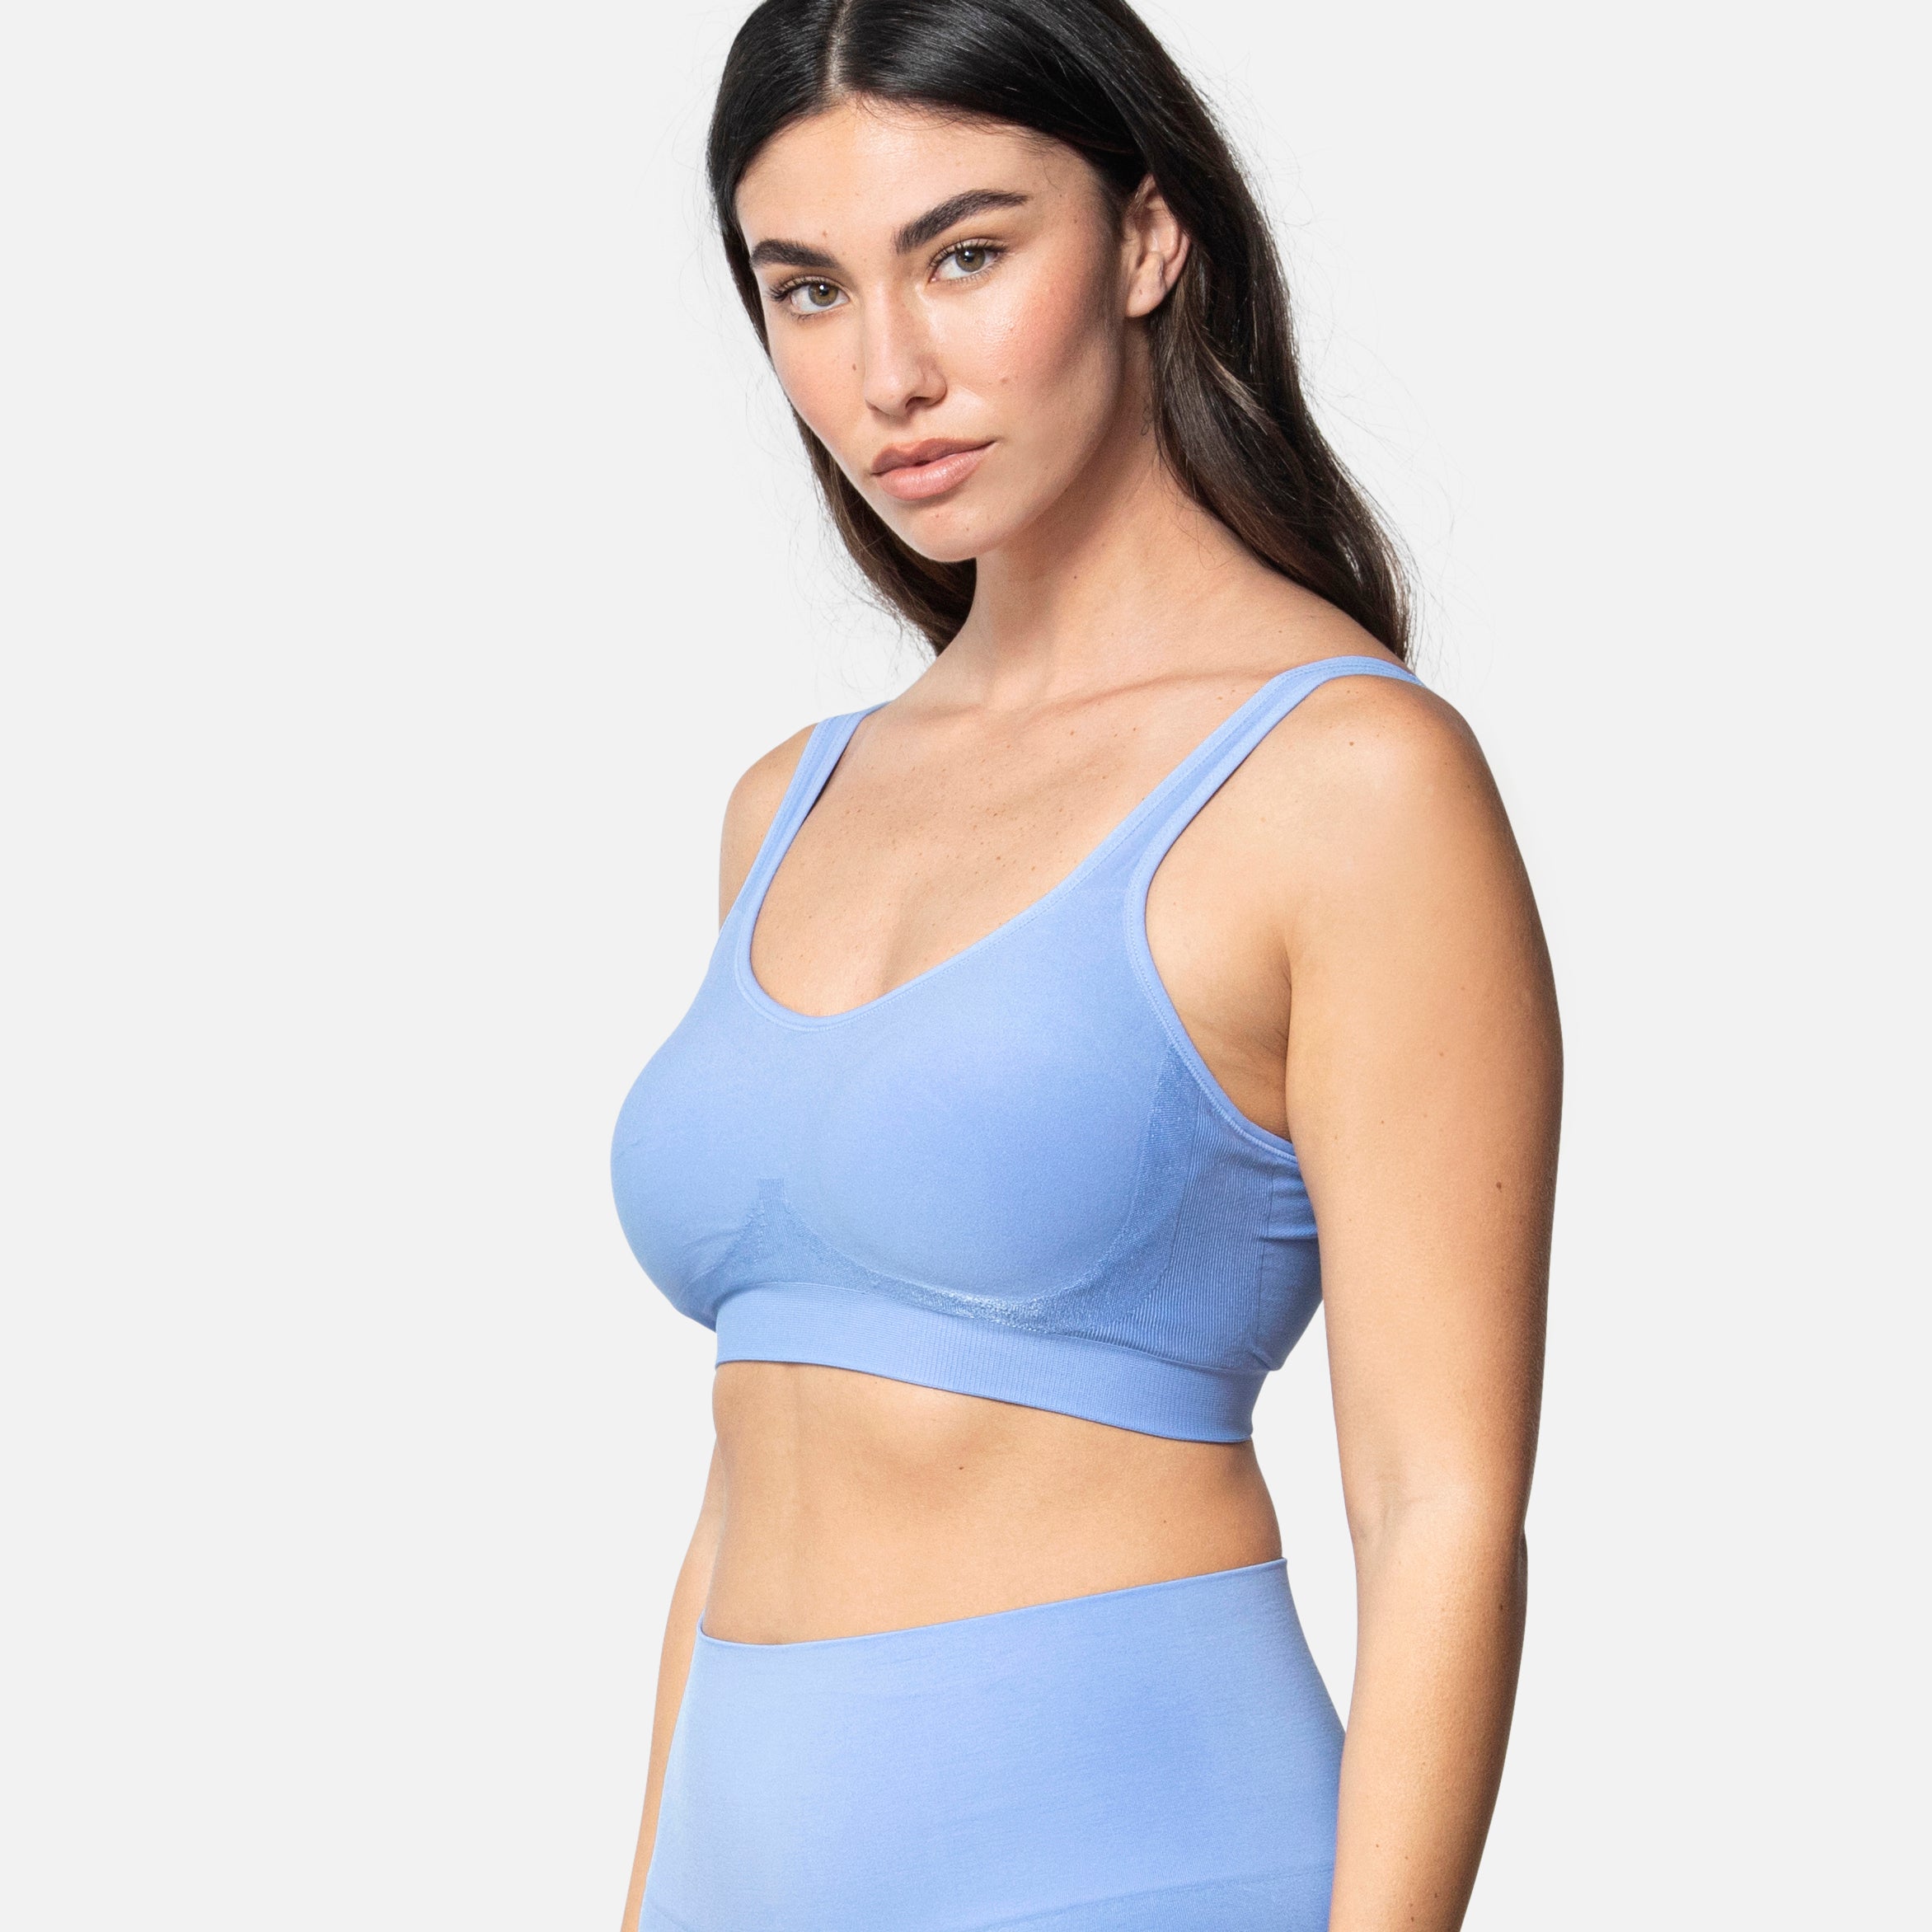 The Comfort Shaping Bra with Adjustable Straps